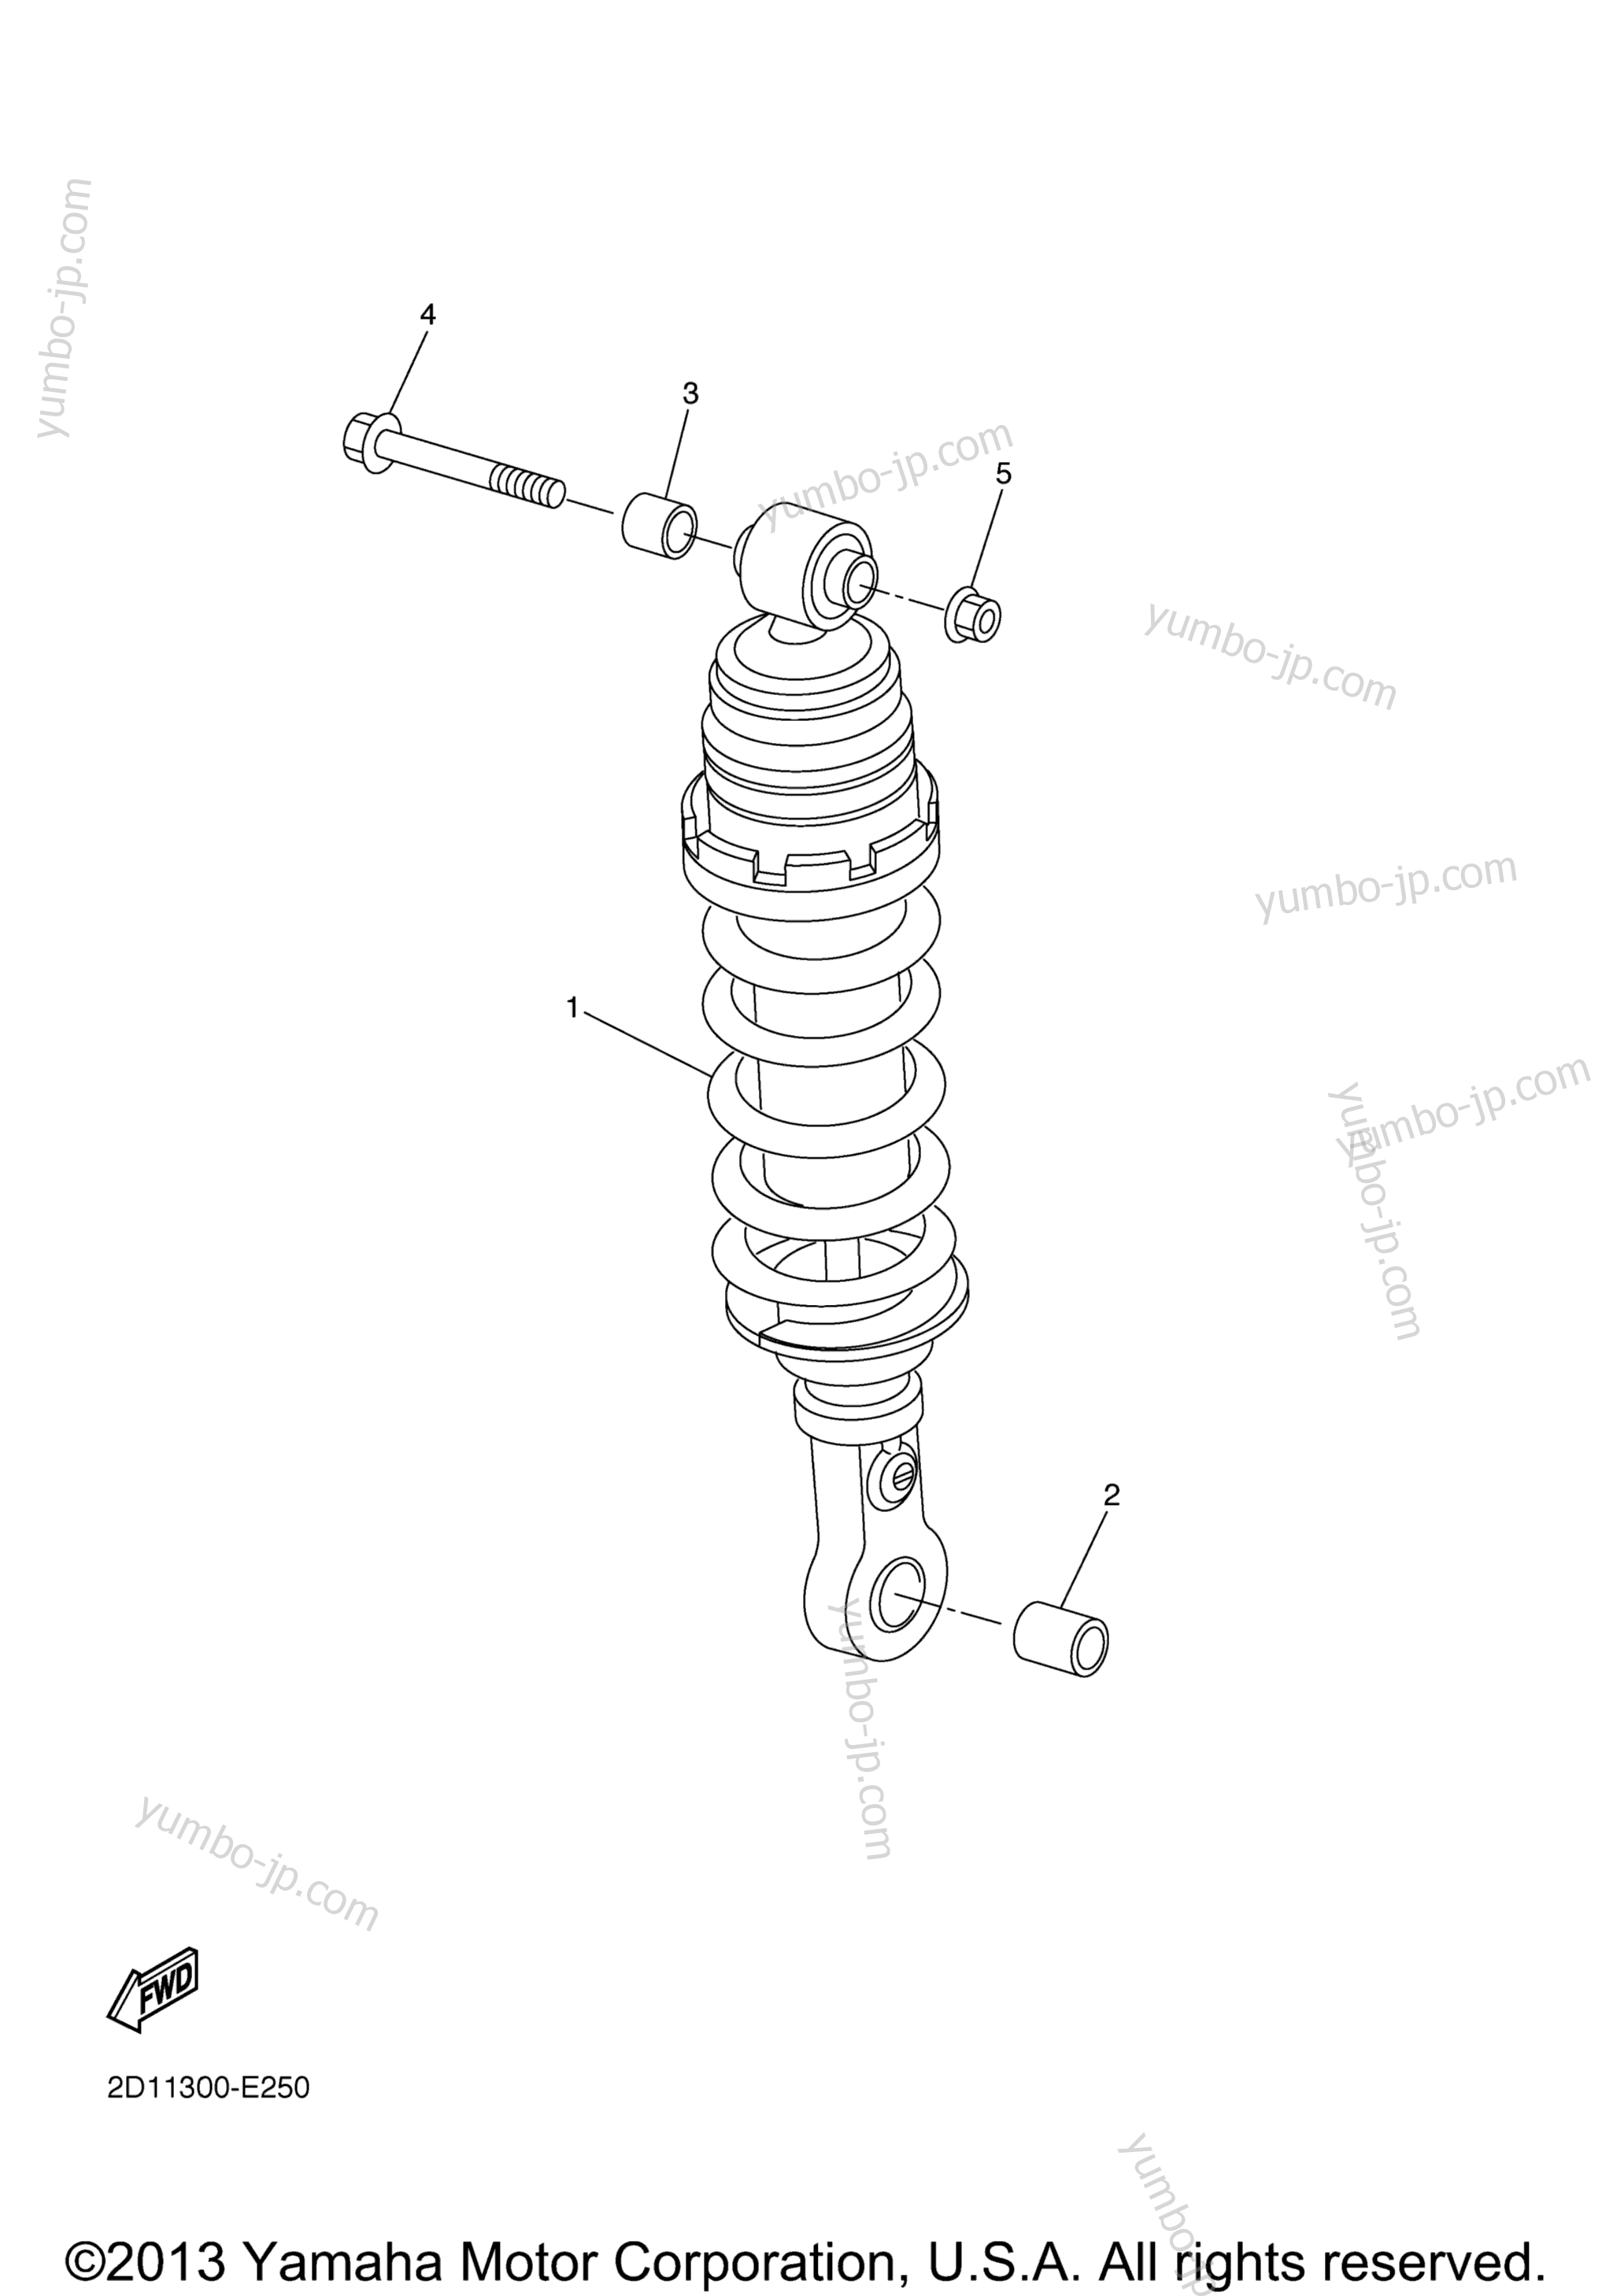 Rear Suspension for motorcycles YAMAHA FZ1 (FZS10ZB) 2010 year